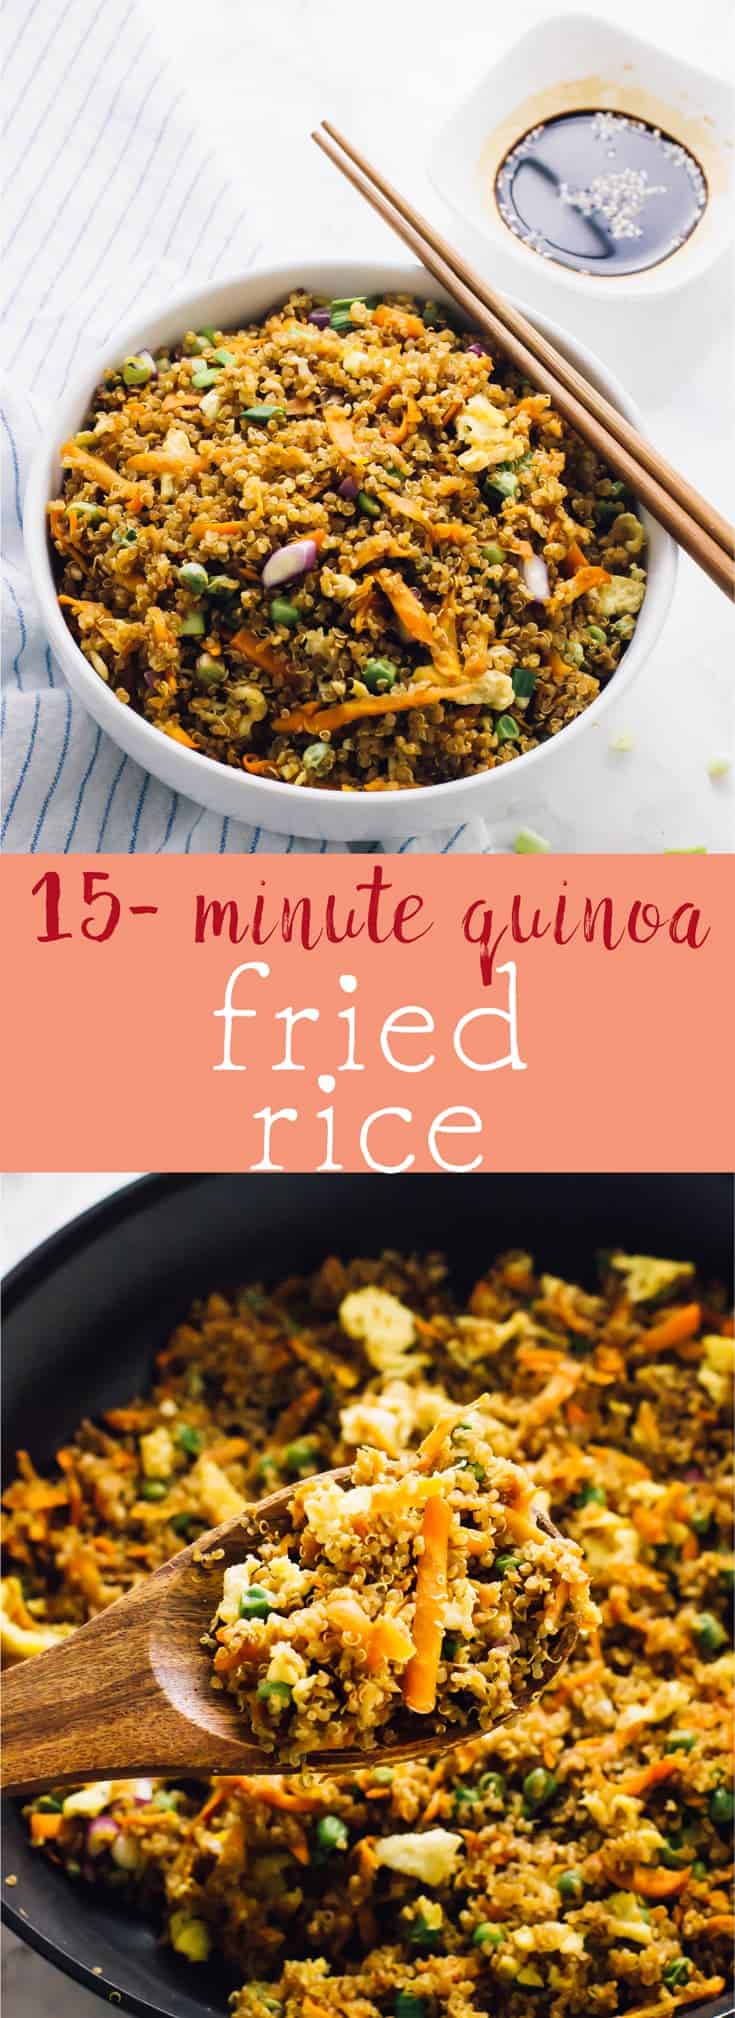 This Quinoa Fried Rice tastes just like regular fried rice except it's even better! Great texture, fantastic flavor, and it only takes 15 minutes to make!  via https://jessicainthekitchen.com